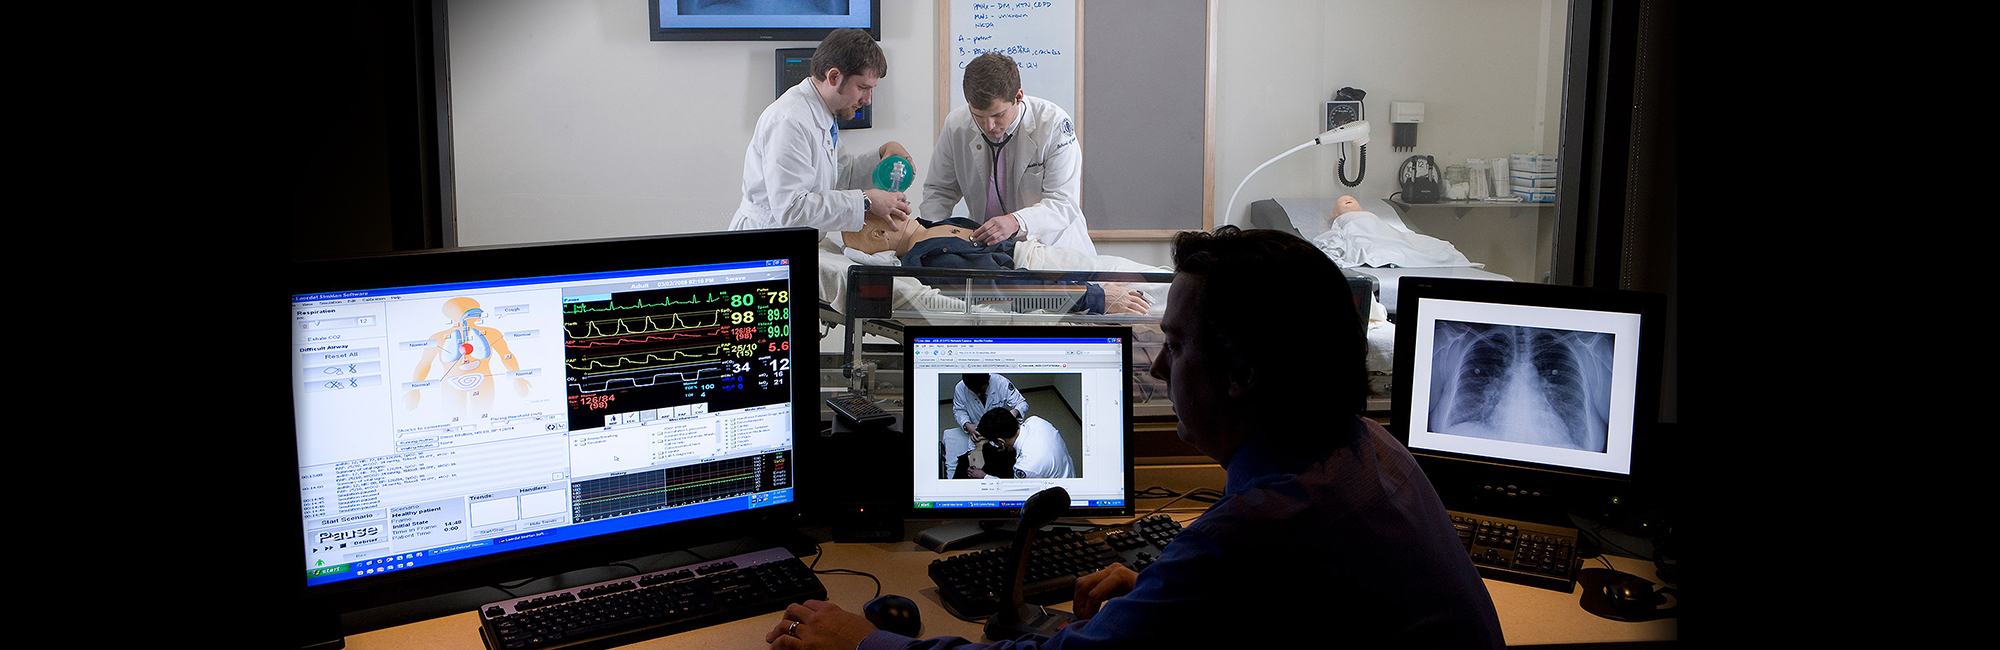 Dr. Thomas Nowicki, director of medical simulation at UConn observes Benjamin Silverberg, a fourth year medical student and Austin Schirmer, a second year medical student